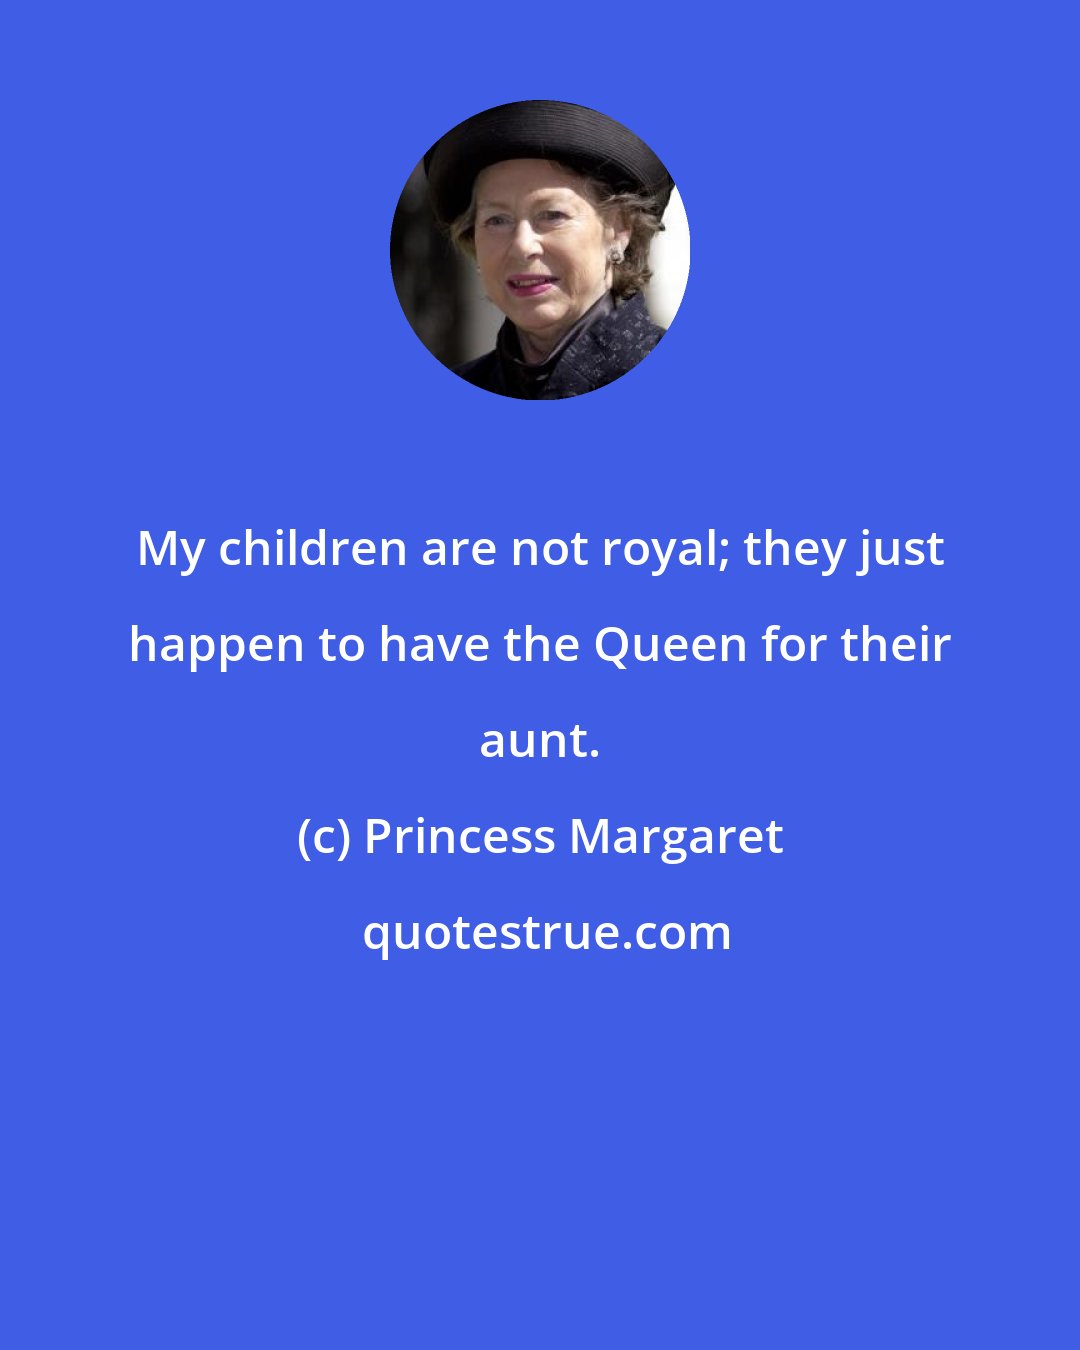 Princess Margaret: My children are not royal; they just happen to have the Queen for their aunt.